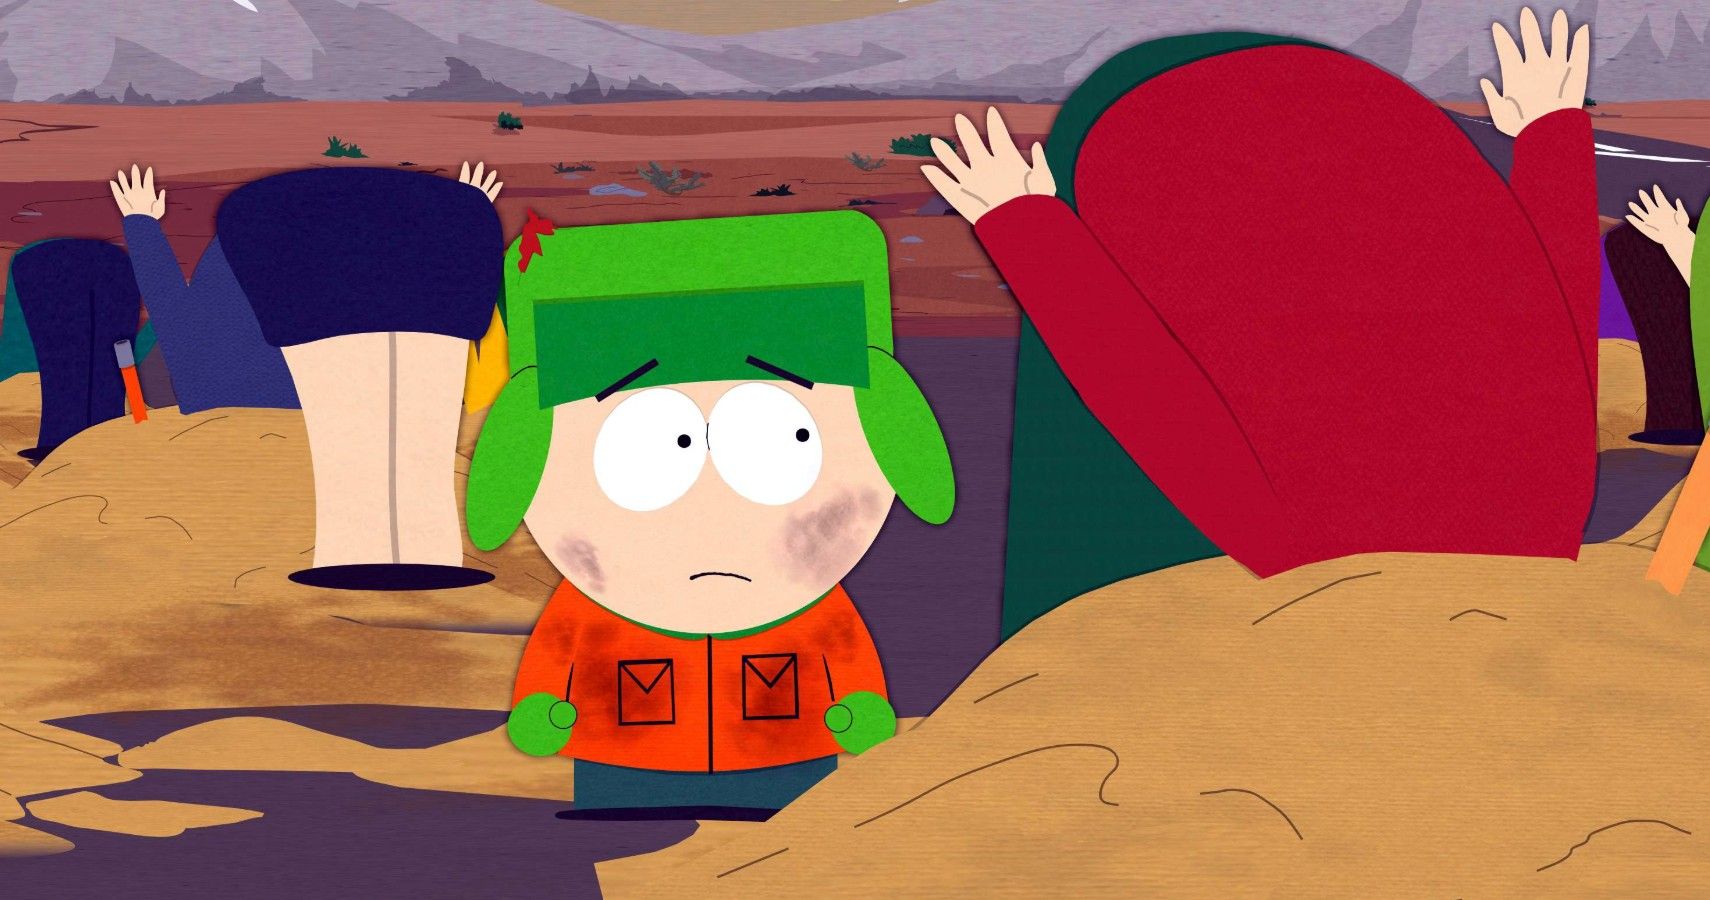 5 Underrated Episodes Of South Park 5 That Are Overrated